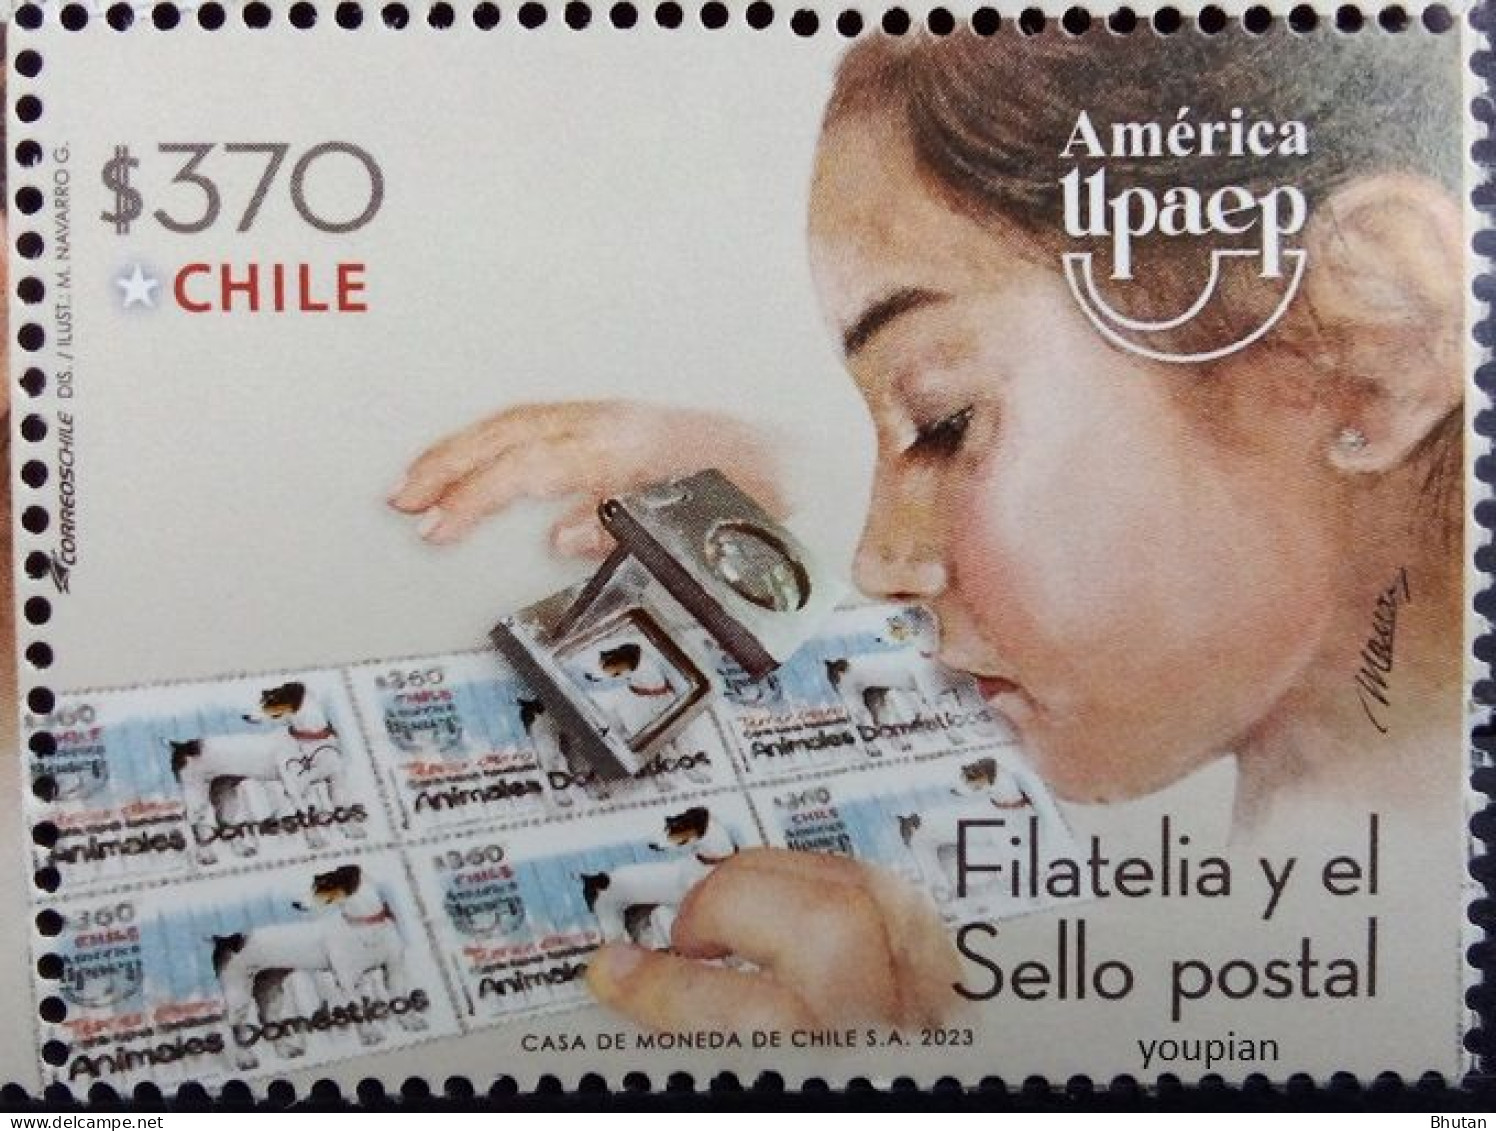 Chile 2023, UPAEP - Philately And The Postage Stamp, MNH Single Stamp - Chile